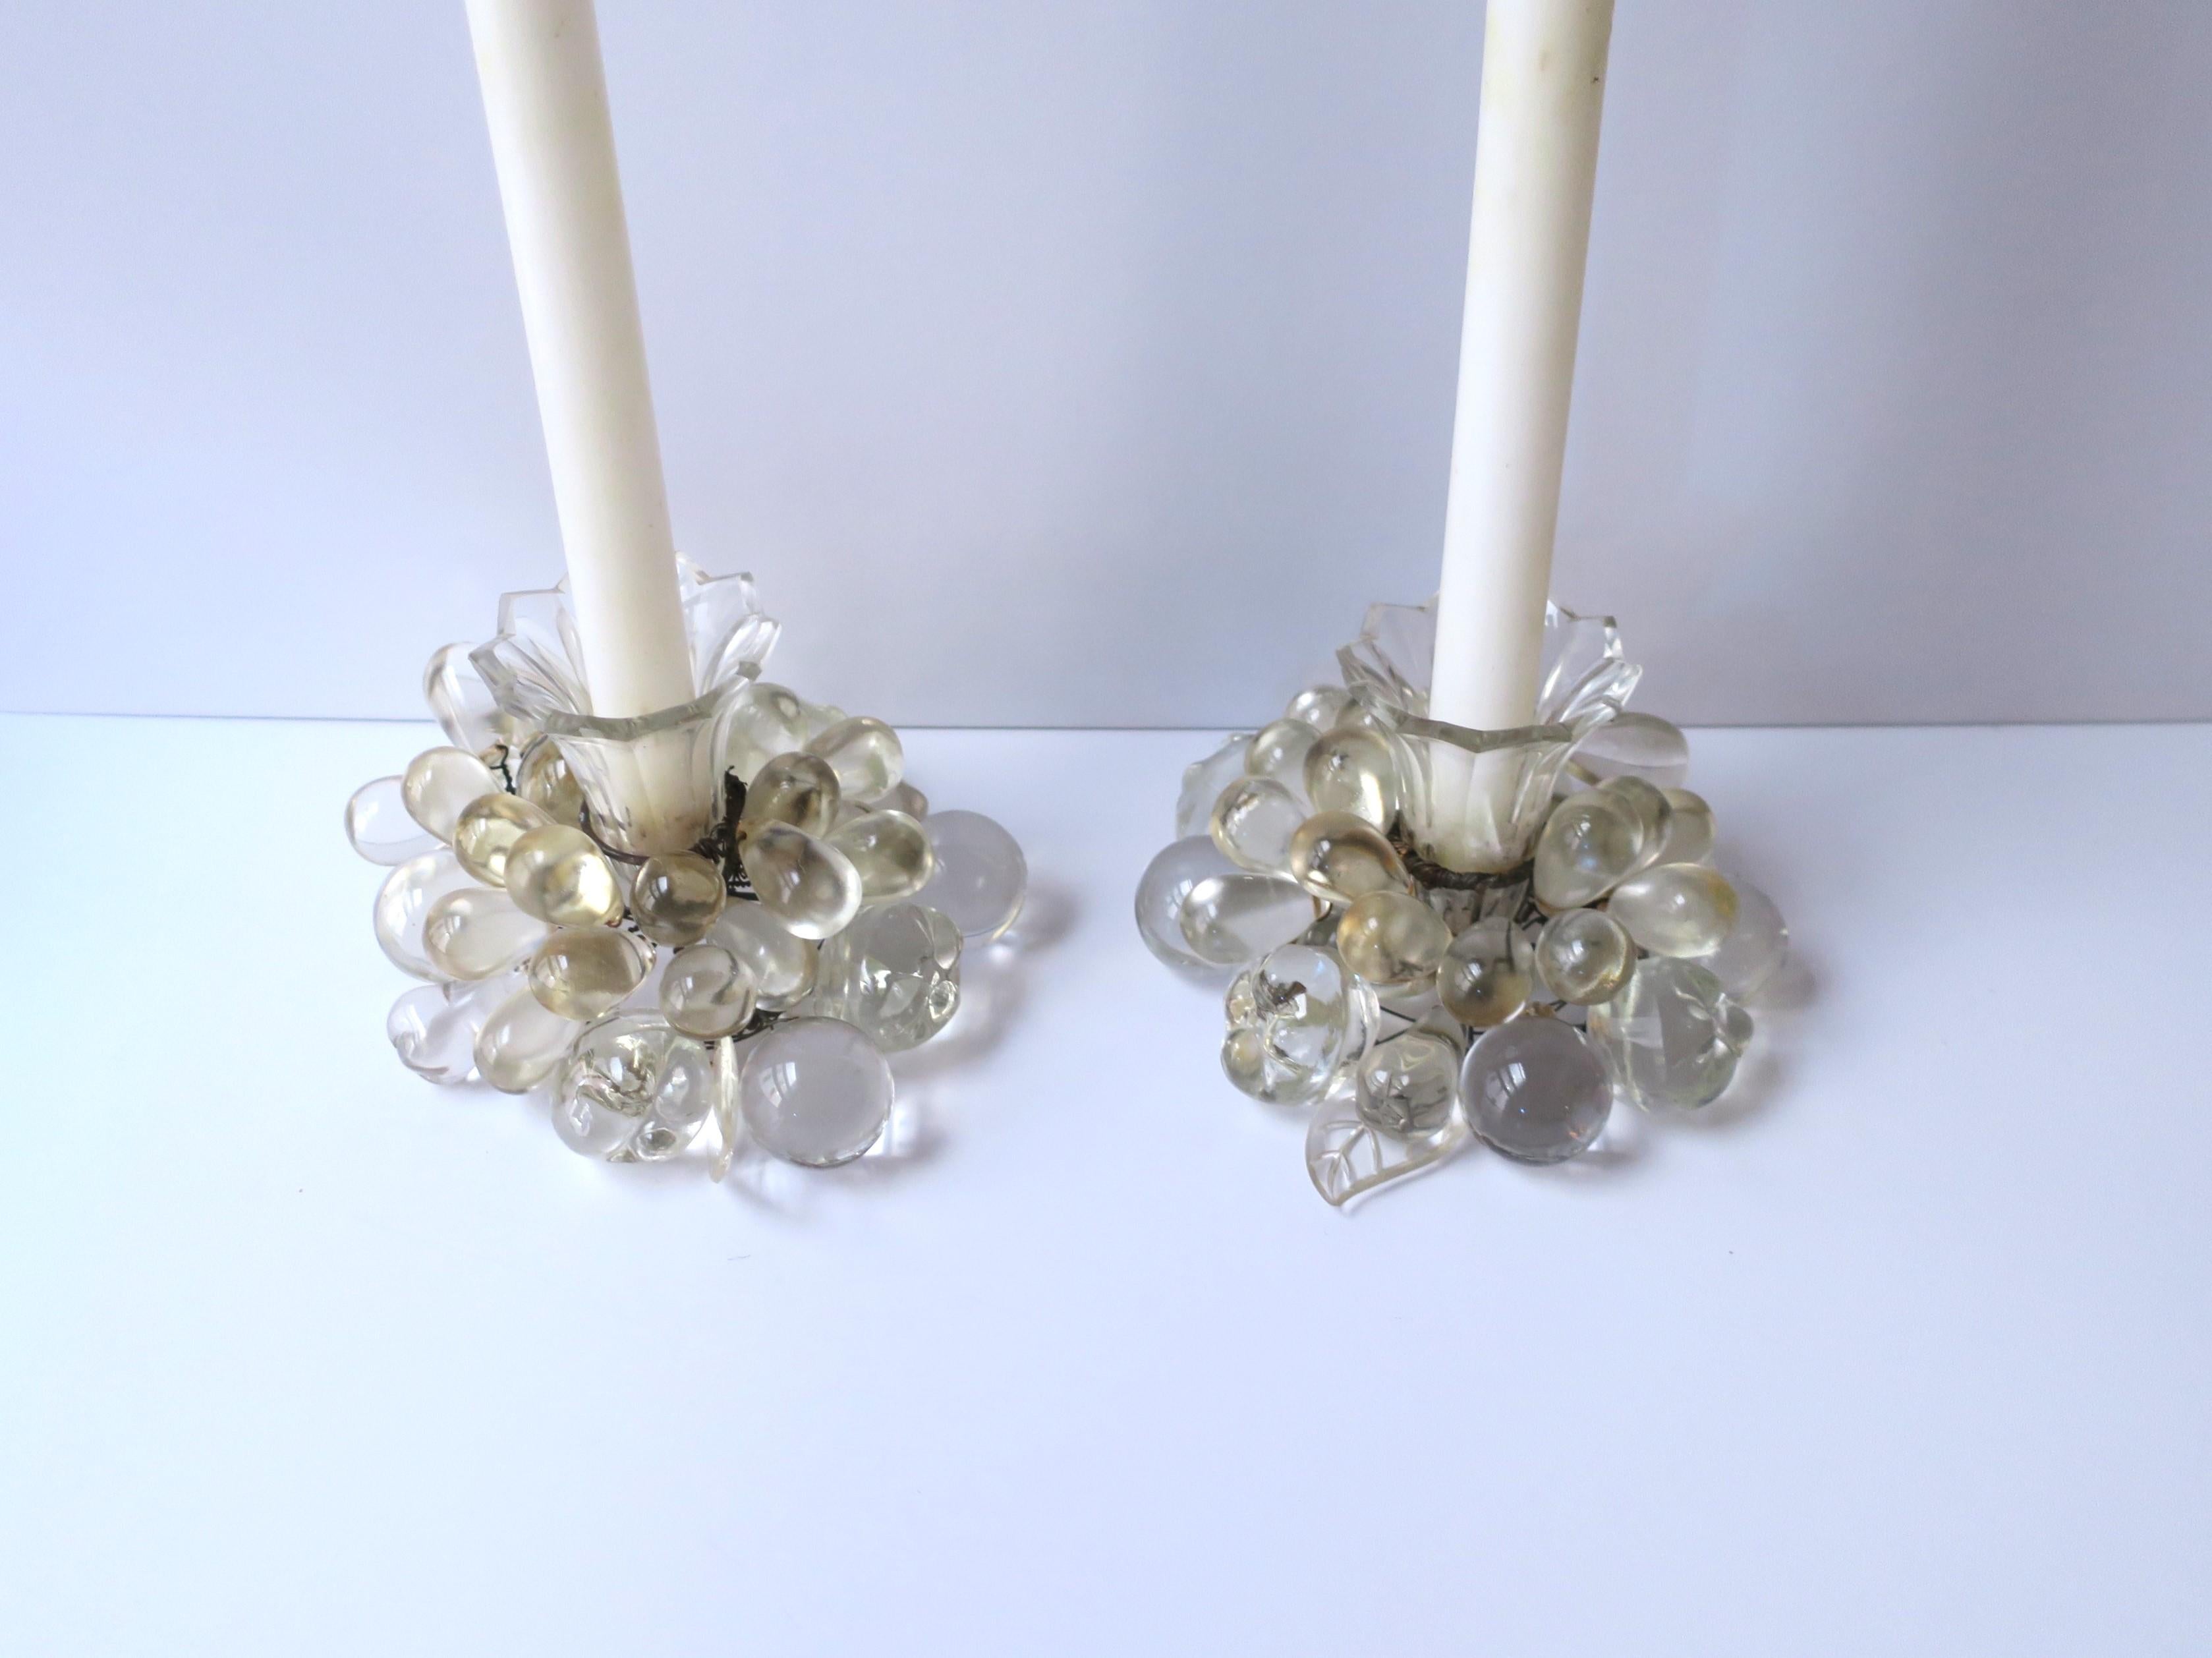 Czech Art Deco Crystal Fruit and Leaf Candlesticks Holders, Pair For Sale